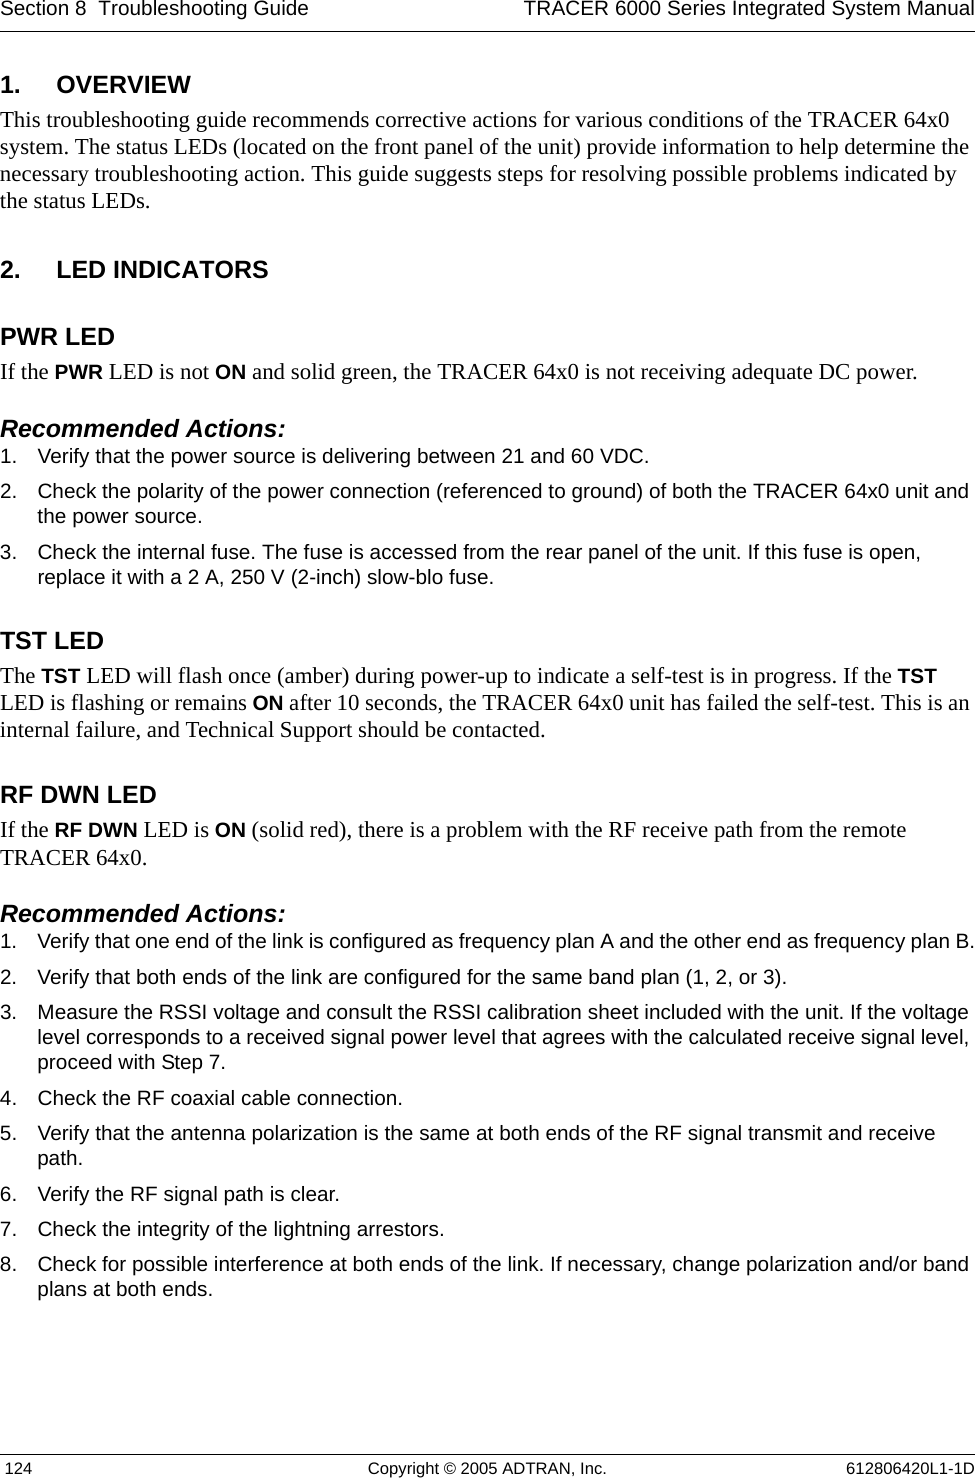 Section 8  Troubleshooting Guide TRACER 6000 Series Integrated System Manual 124 Copyright © 2005 ADTRAN, Inc. 612806420L1-1D1. OVERVIEWThis troubleshooting guide recommends corrective actions for various conditions of the TRACER 64x0 system. The status LEDs (located on the front panel of the unit) provide information to help determine the necessary troubleshooting action. This guide suggests steps for resolving possible problems indicated by the status LEDs.2. LED INDICATORSPWR LEDIf the PWR LED is not ON and solid green, the TRACER 64x0 is not receiving adequate DC power. Recommended Actions:1. Verify that the power source is delivering between 21 and 60 VDC.2. Check the polarity of the power connection (referenced to ground) of both the TRACER 64x0 unit and the power source.3. Check the internal fuse. The fuse is accessed from the rear panel of the unit. If this fuse is open, replace it with a 2 A, 250 V (2-inch) slow-blo fuse.TST LEDThe TST LED will flash once (amber) during power-up to indicate a self-test is in progress. If the TST LED is flashing or remains ON after 10 seconds, the TRACER 64x0 unit has failed the self-test. This is an internal failure, and Technical Support should be contacted.RF DWN LEDIf the RF DWN LED is ON (solid red), there is a problem with the RF receive path from the remote TRACER 64x0.Recommended Actions:1. Verify that one end of the link is configured as frequency plan A and the other end as frequency plan B.2. Verify that both ends of the link are configured for the same band plan (1, 2, or 3).3. Measure the RSSI voltage and consult the RSSI calibration sheet included with the unit. If the voltage level corresponds to a received signal power level that agrees with the calculated receive signal level, proceed with Step 7.4. Check the RF coaxial cable connection.5. Verify that the antenna polarization is the same at both ends of the RF signal transmit and receive path.6. Verify the RF signal path is clear.7. Check the integrity of the lightning arrestors.8. Check for possible interference at both ends of the link. If necessary, change polarization and/or band plans at both ends.